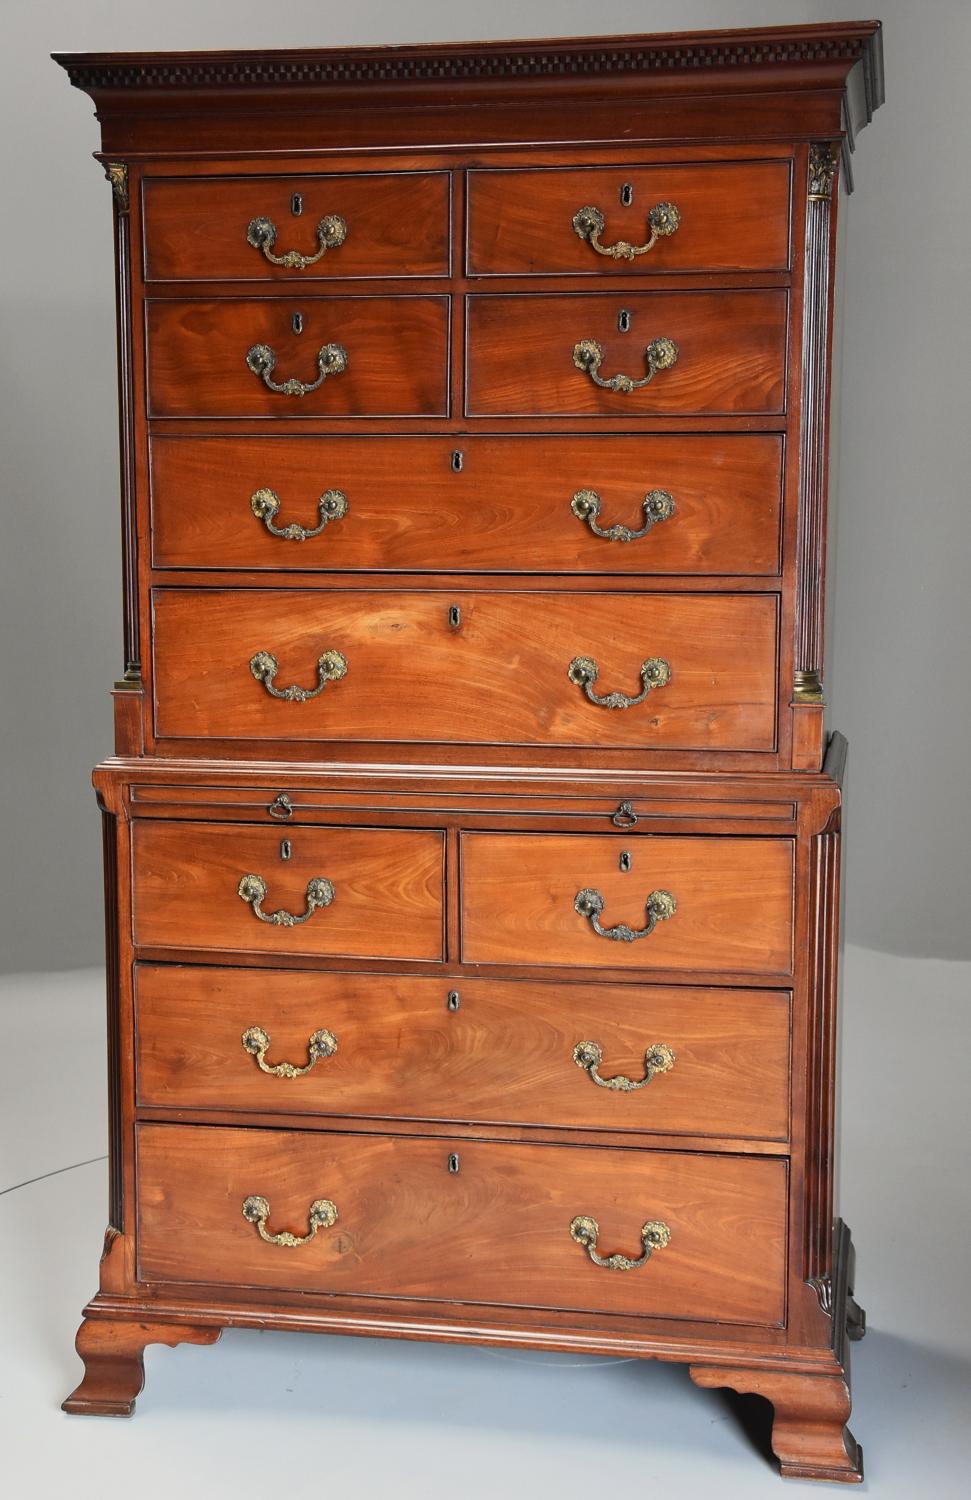 Superb quality late 18th century mahogany chest on chest